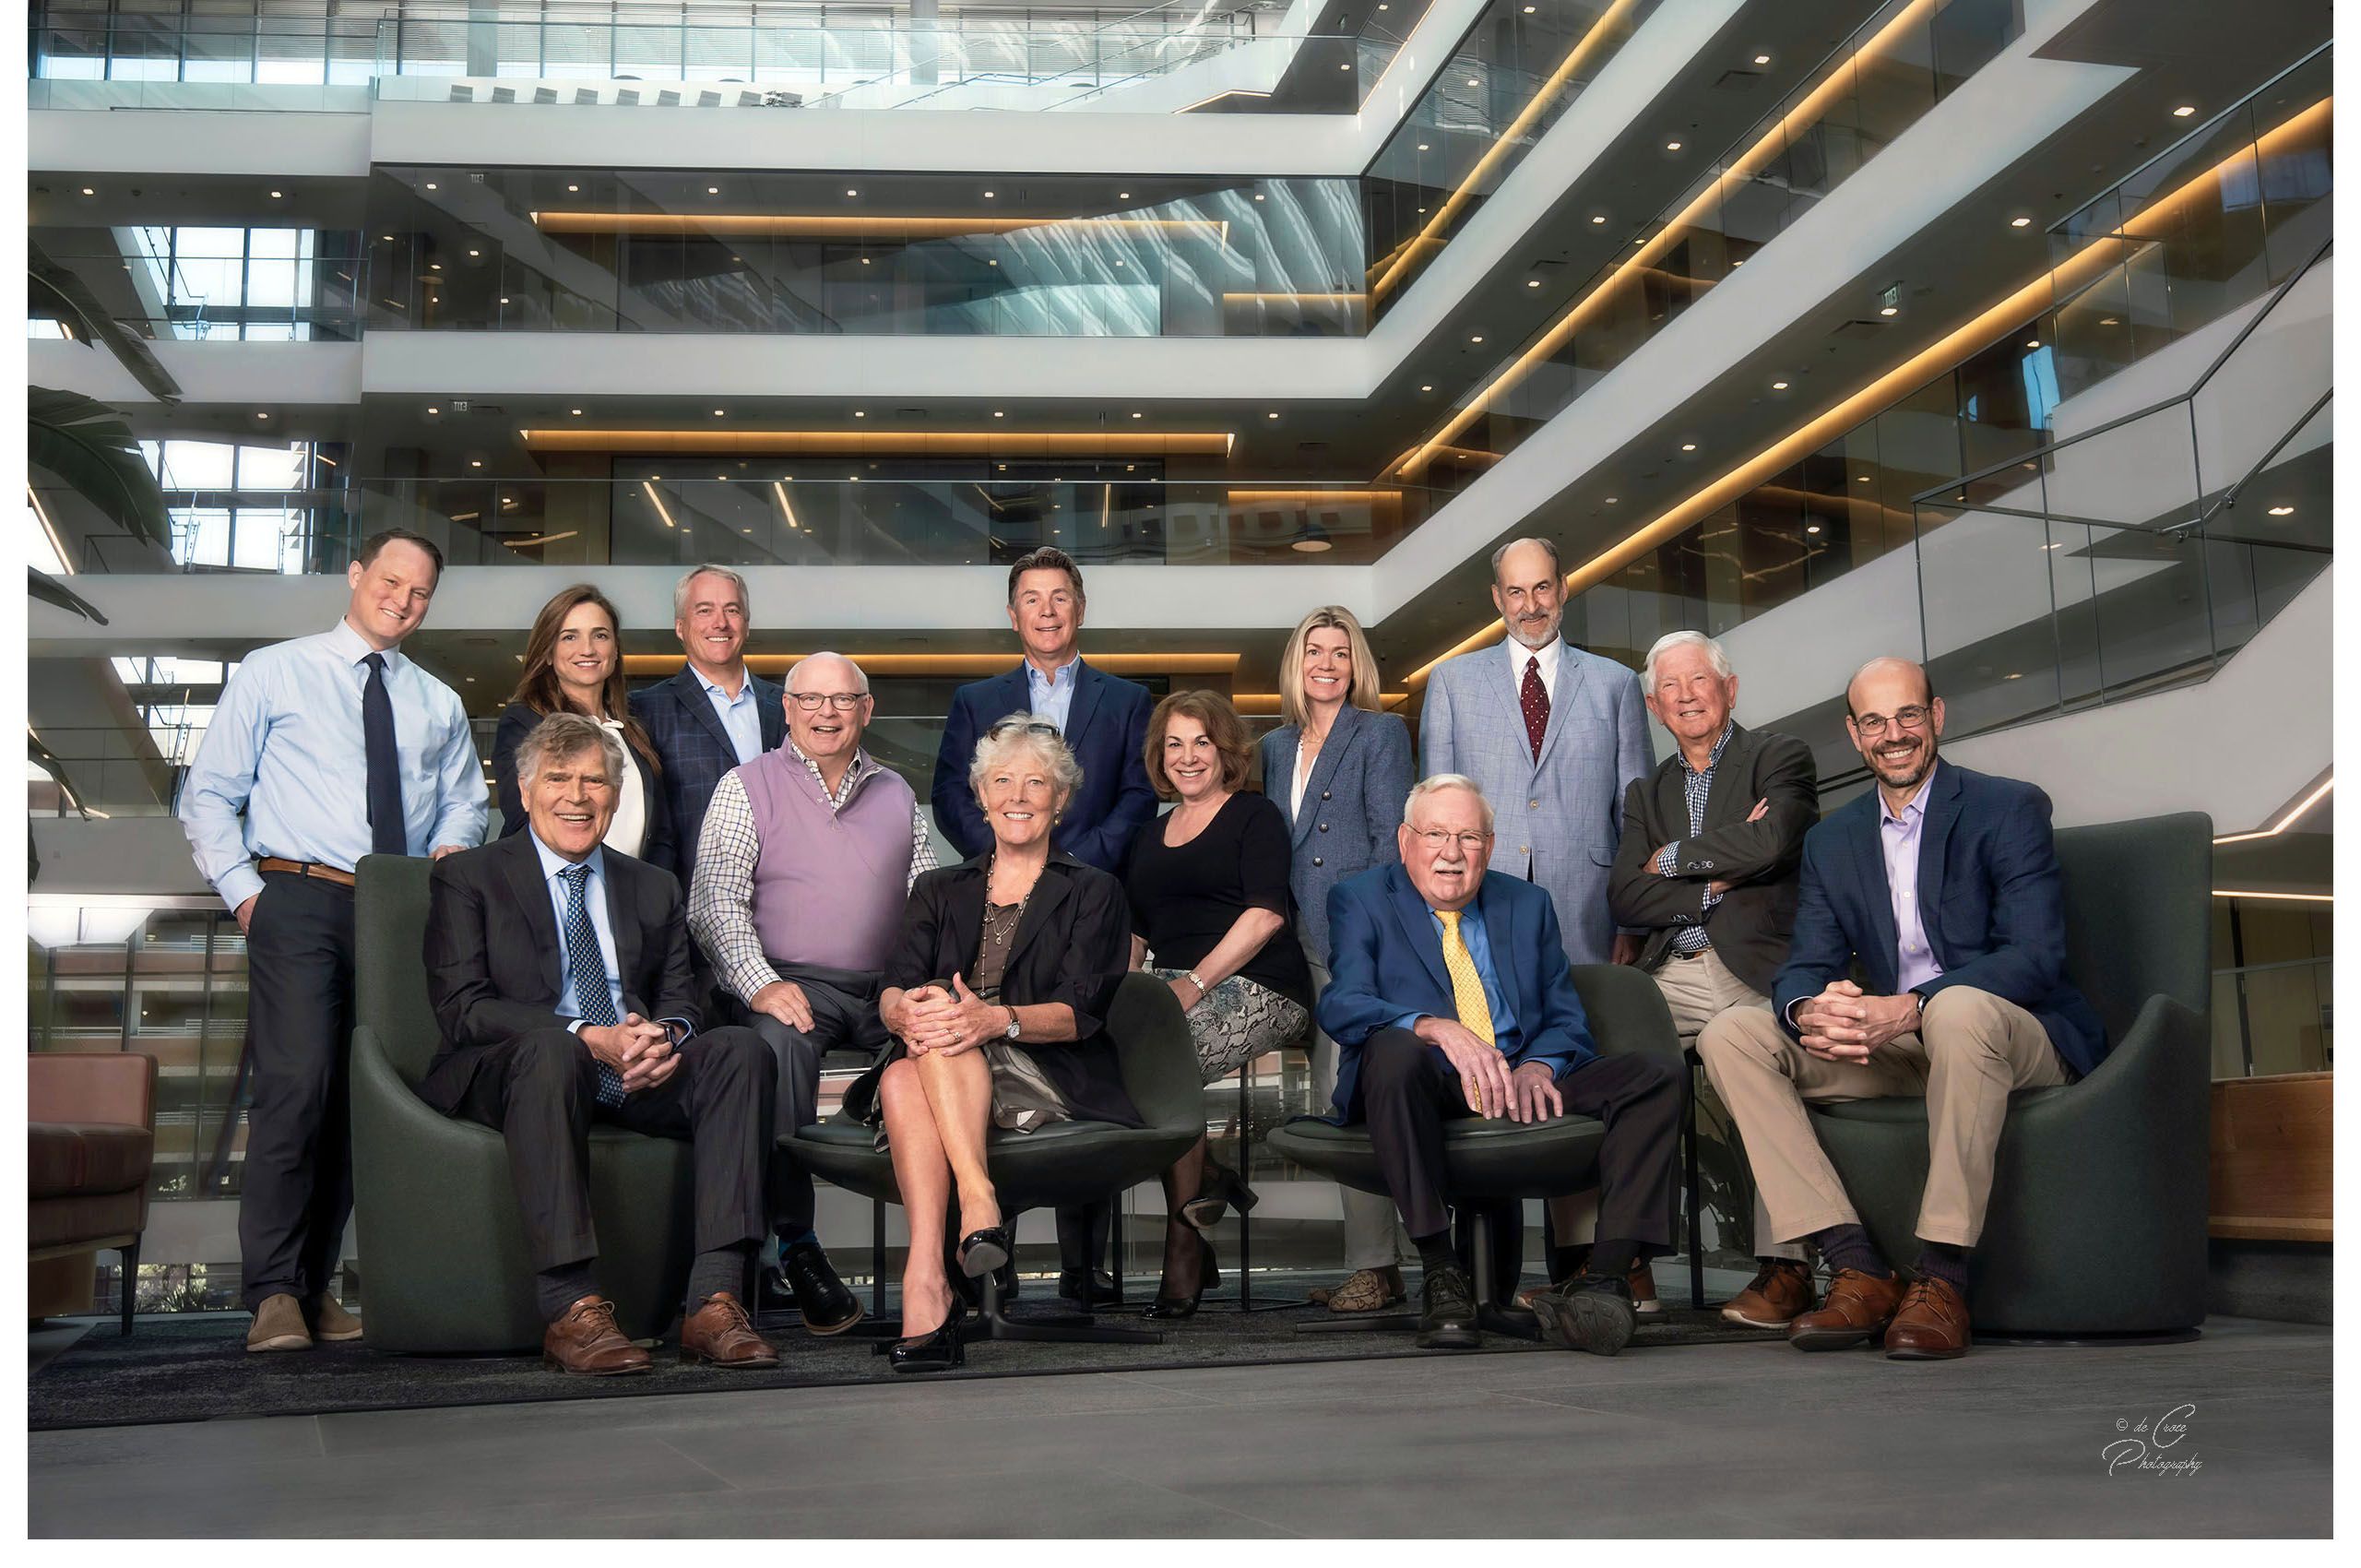 Medical Board Group Photo Gates Institute